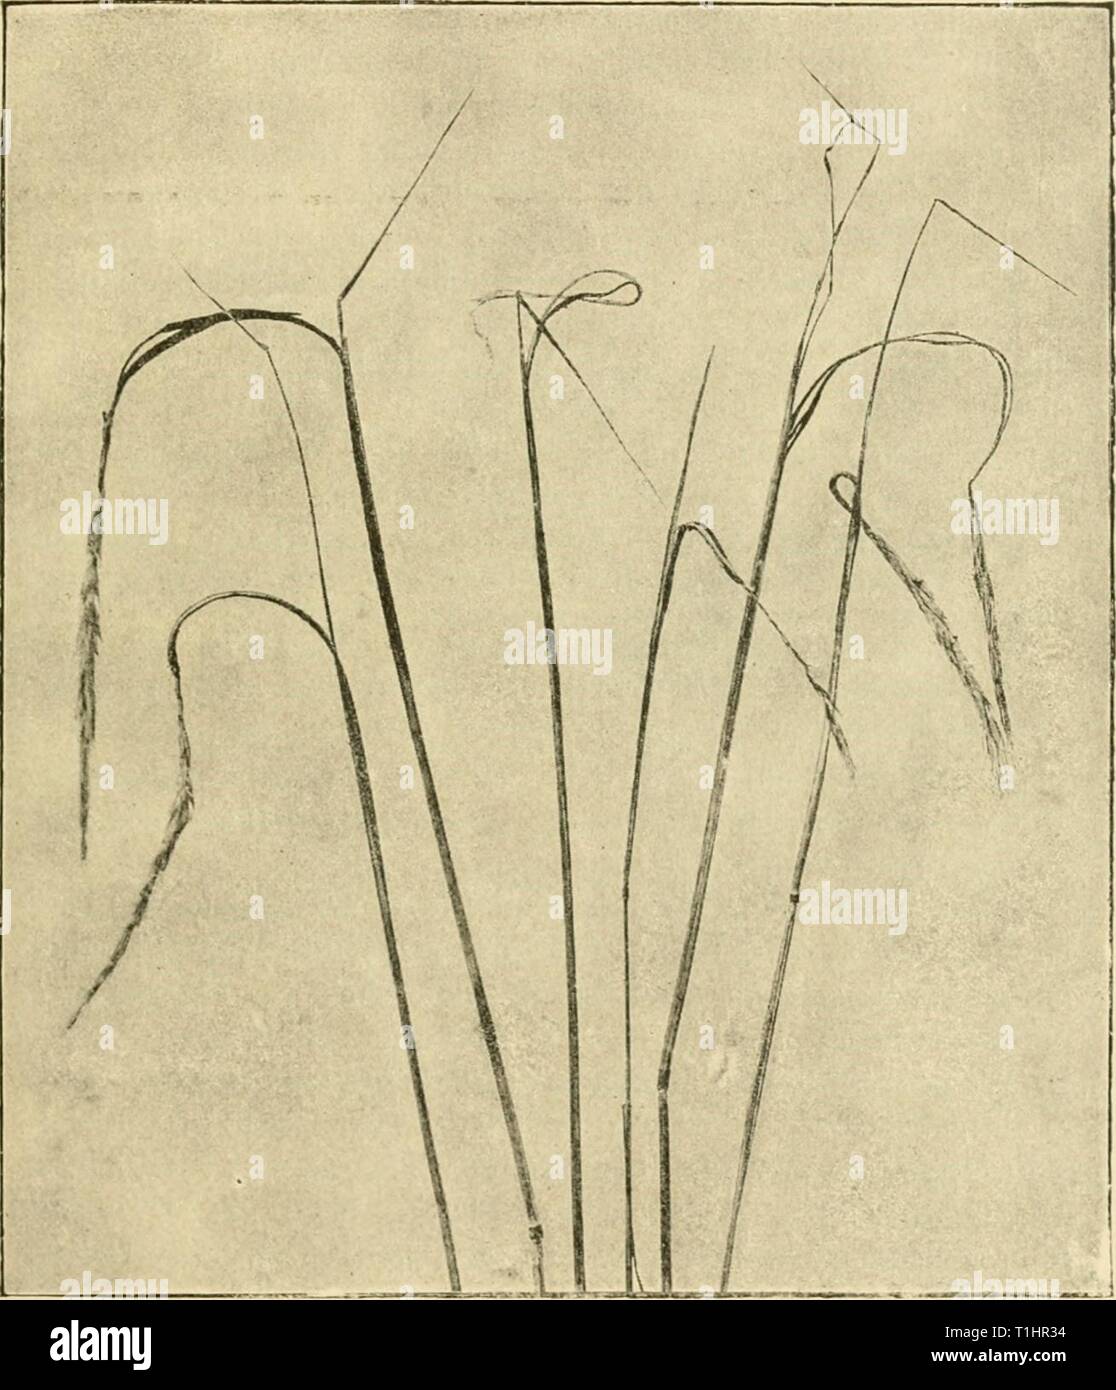 Diseases of plants induced by Diseases of plants induced by cryptogamic parasites; introduction to the study of pathogenic Fungi, slime-Fungi, bacteria, & Algae  diseasesofplants00tube Year: 1897  UROCYSTIS. 315 Urocystis occulta (Wallr.). (Britain and U.S. America.) This species is common on the haulms, leaves, leaf-sheaths, and less commonly on iloral parts of Sccale cercale (rye). It causes the    Fk;. 172. — Vrori/stix occulta on Rj-e. Tlie ears are stunted, and the spore- puwder emerges from longitudinal fissures in the upper part of the steins. (V. Tubeiif phot.) formation of grey stripe Stock Photo